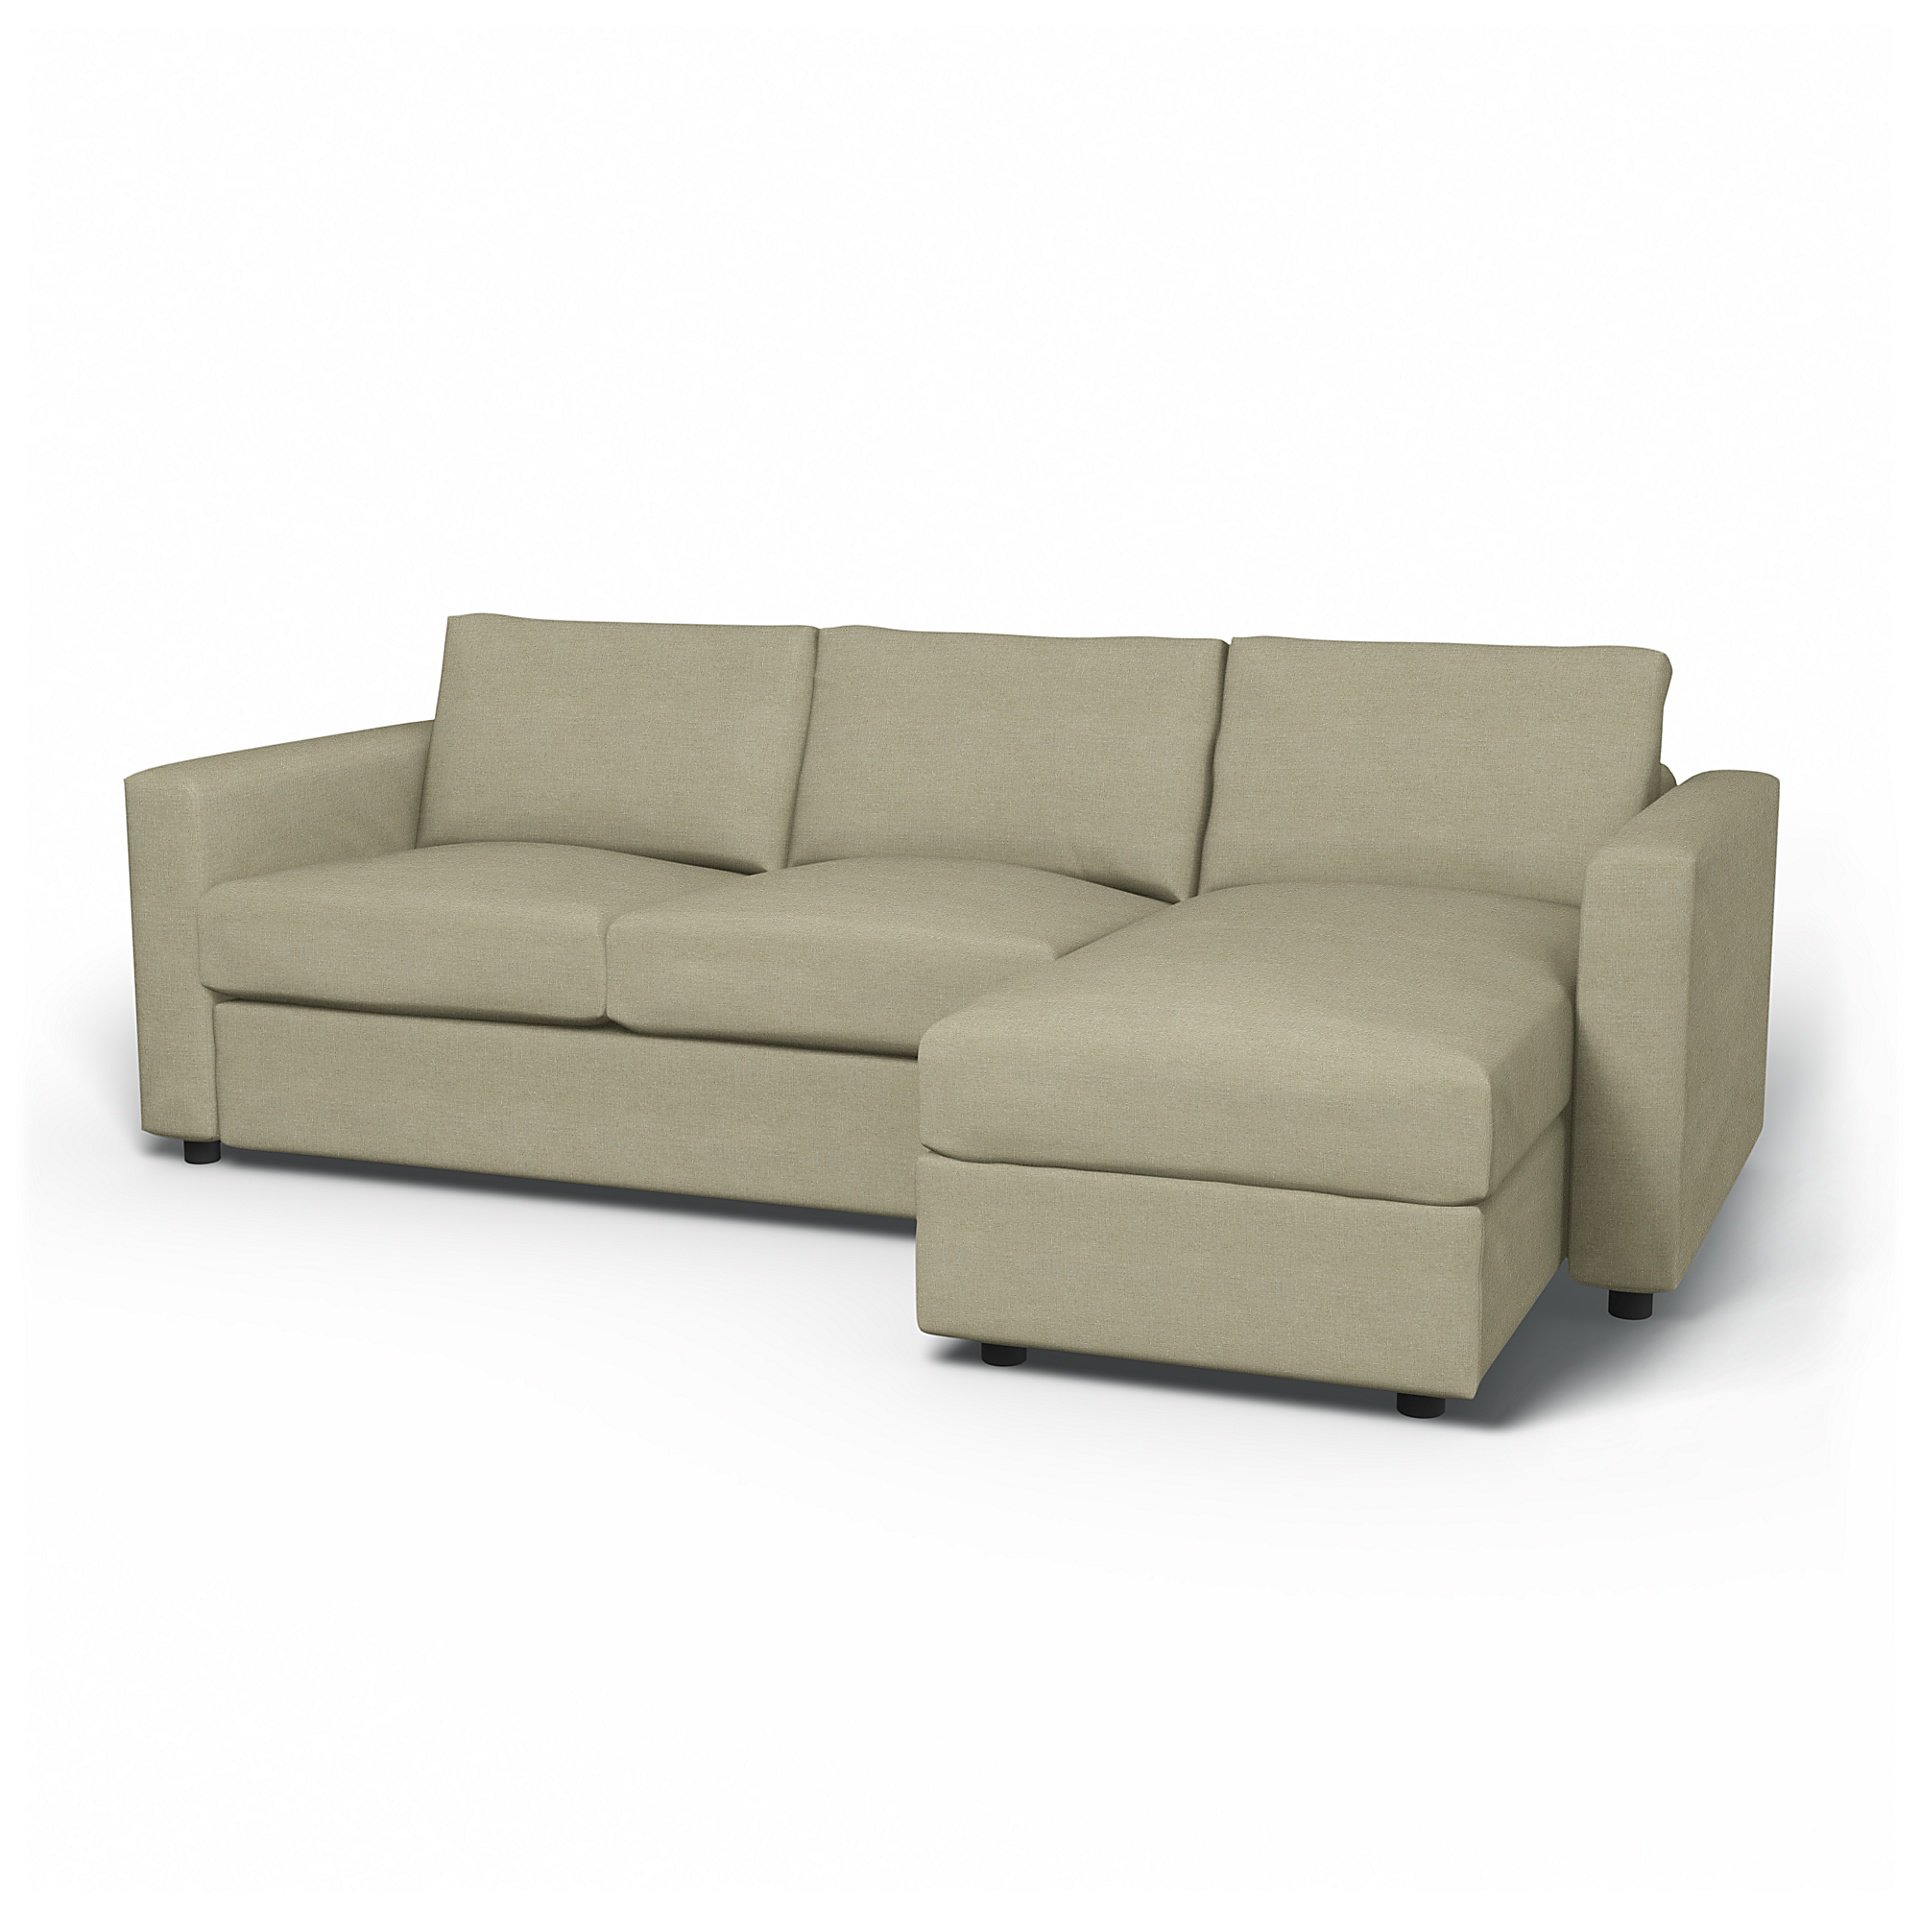 IKEA - Vimle 2 Seater Sofa with Chaise Cover, Pebble, Linen - Bemz